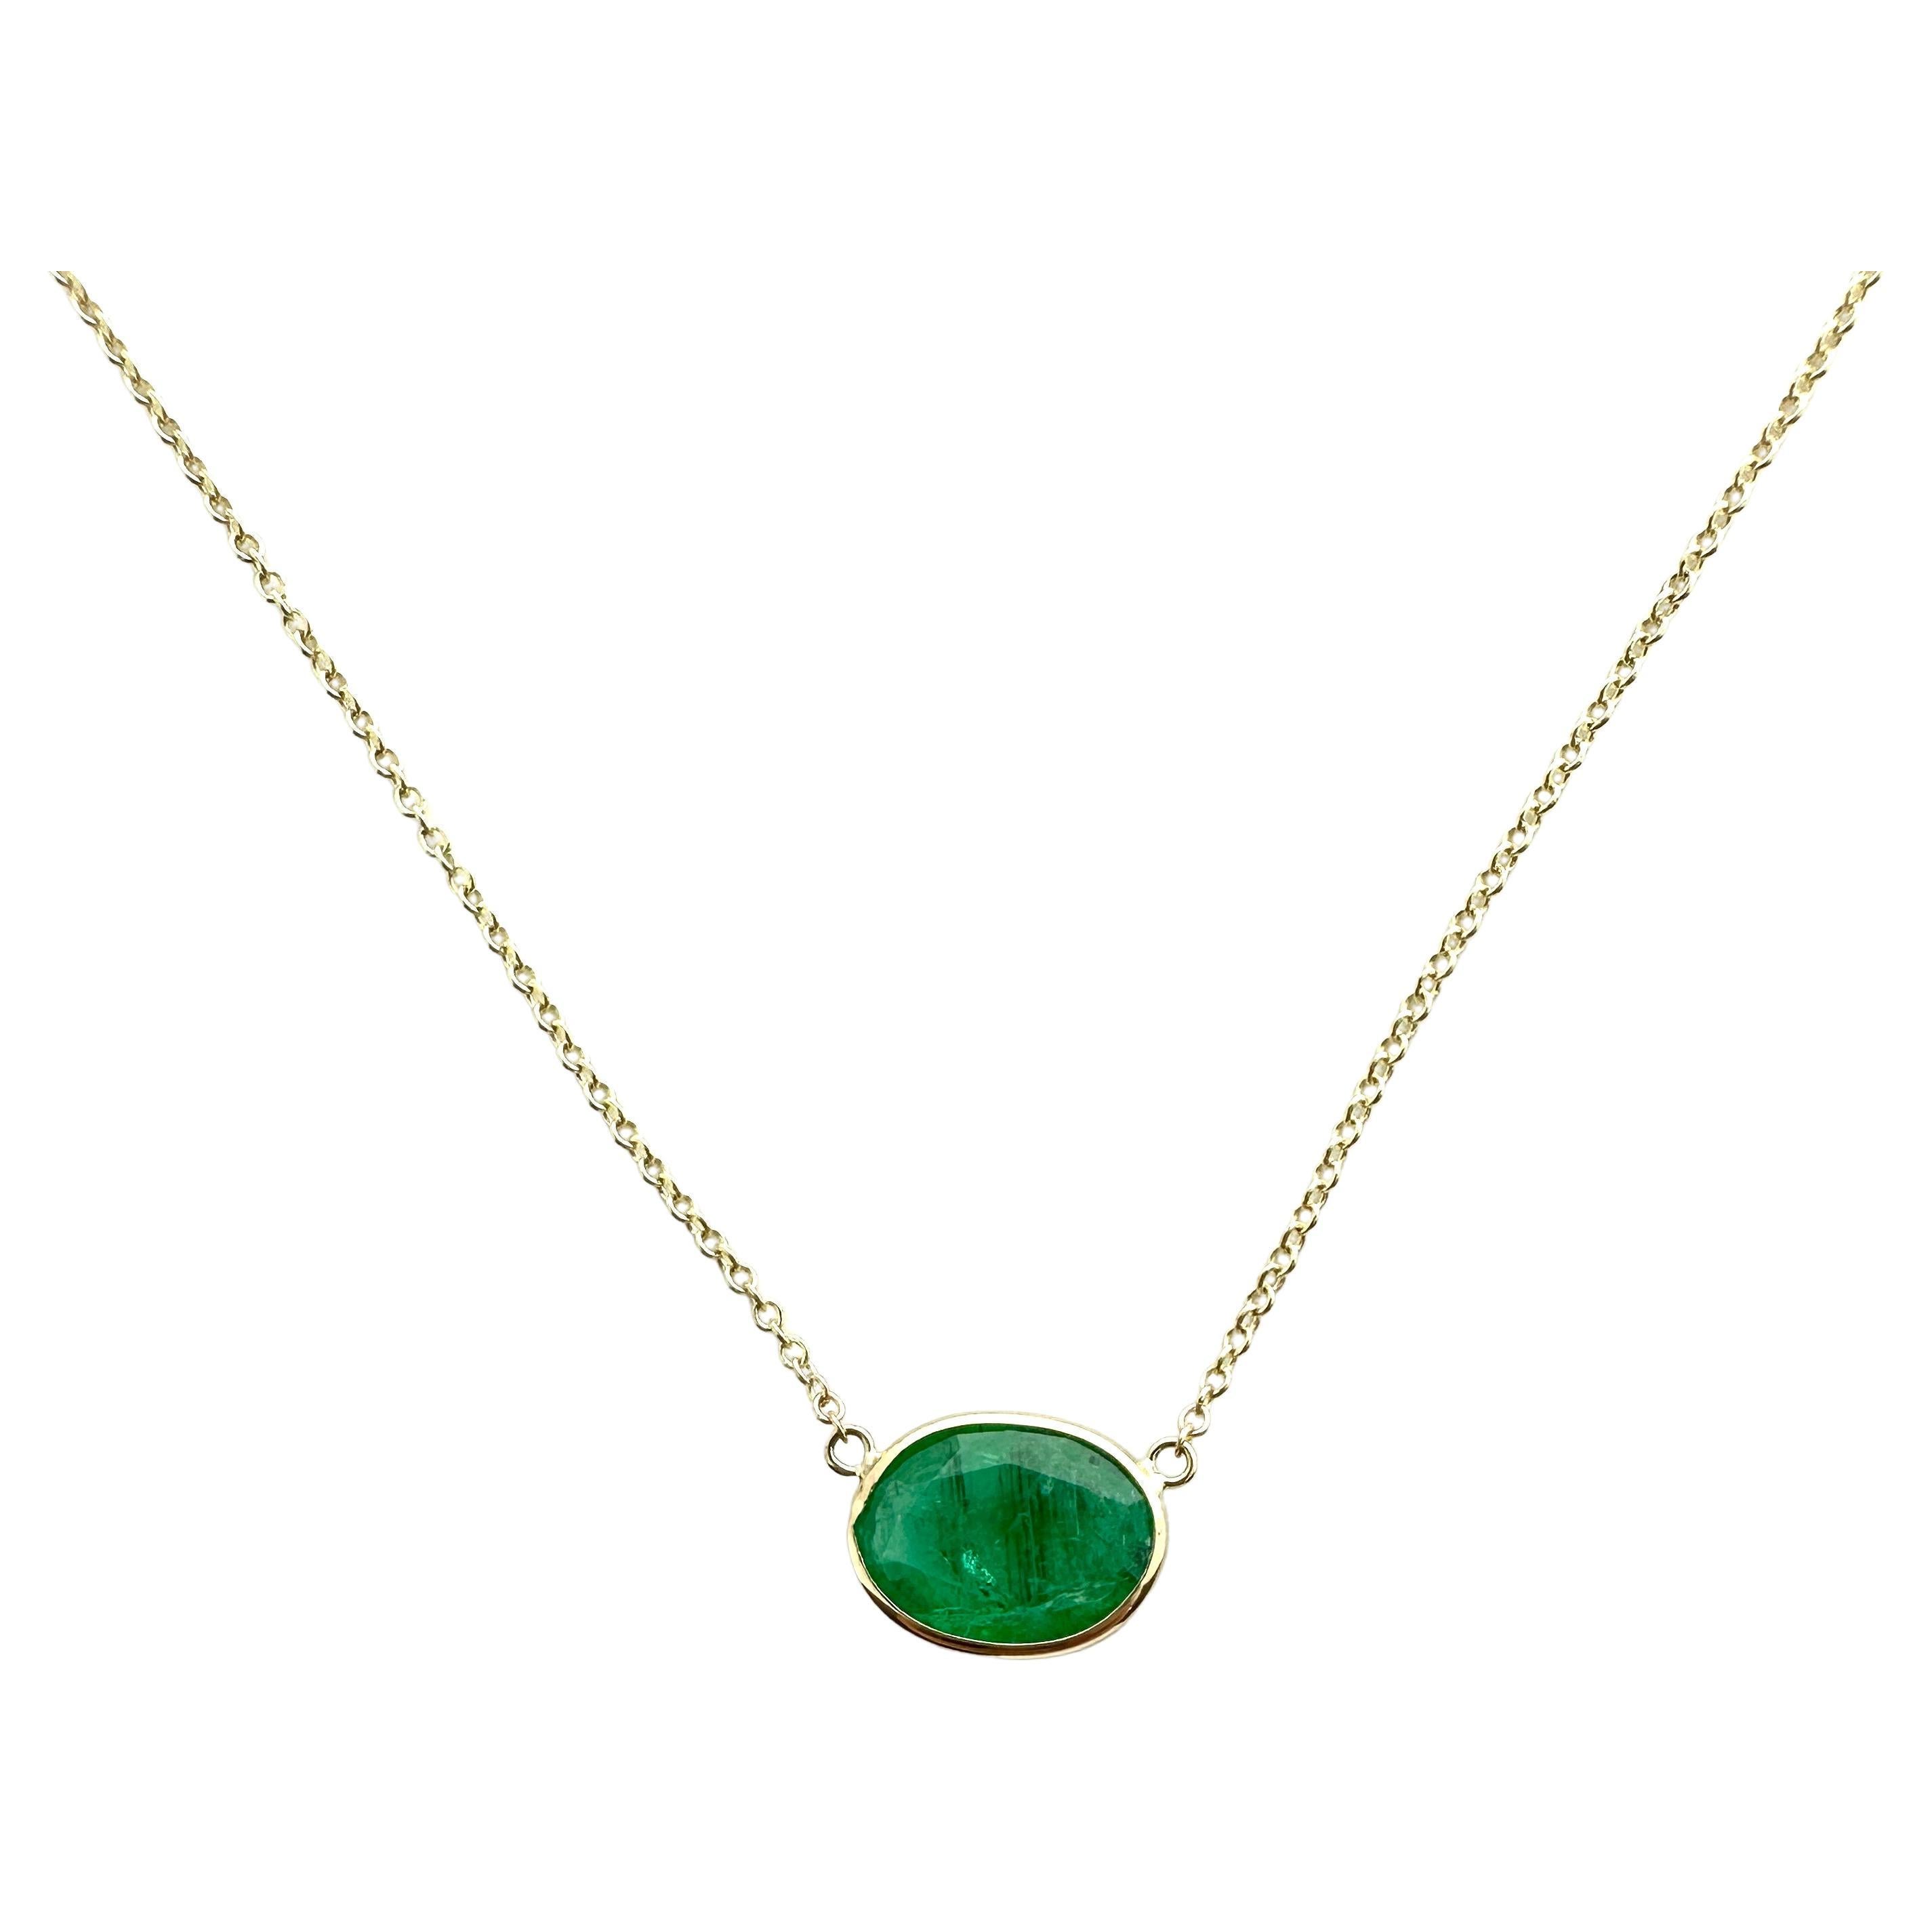 3.09 Carat Weight Green Emerald Oval Cut Solitaire Necklace in 14k Yellow Gold For Sale